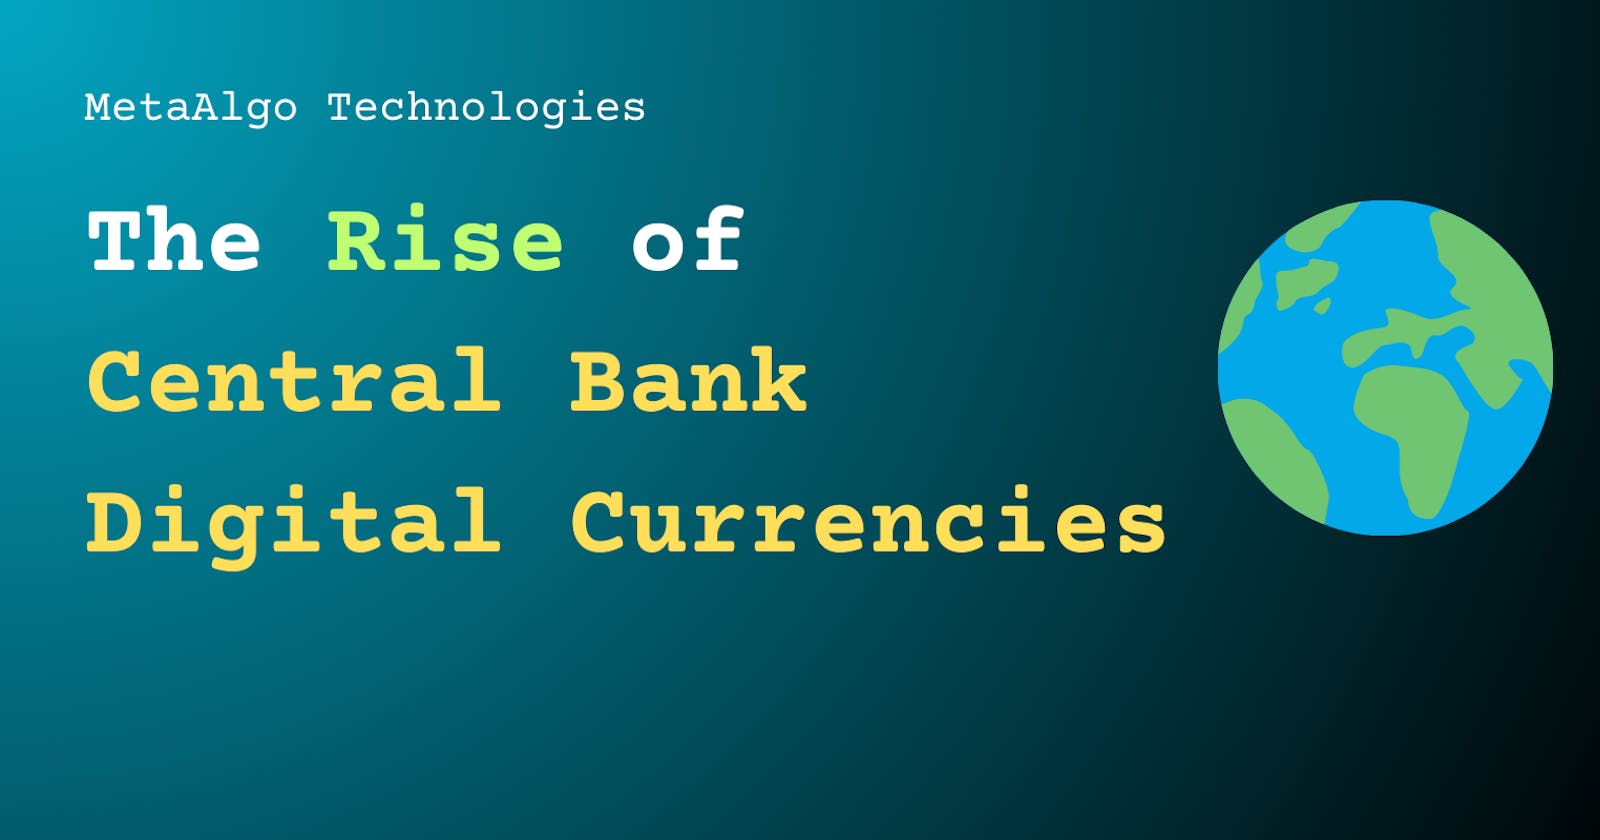 The Rise of Central Bank Digital Currencies: A Technological Deep Dive